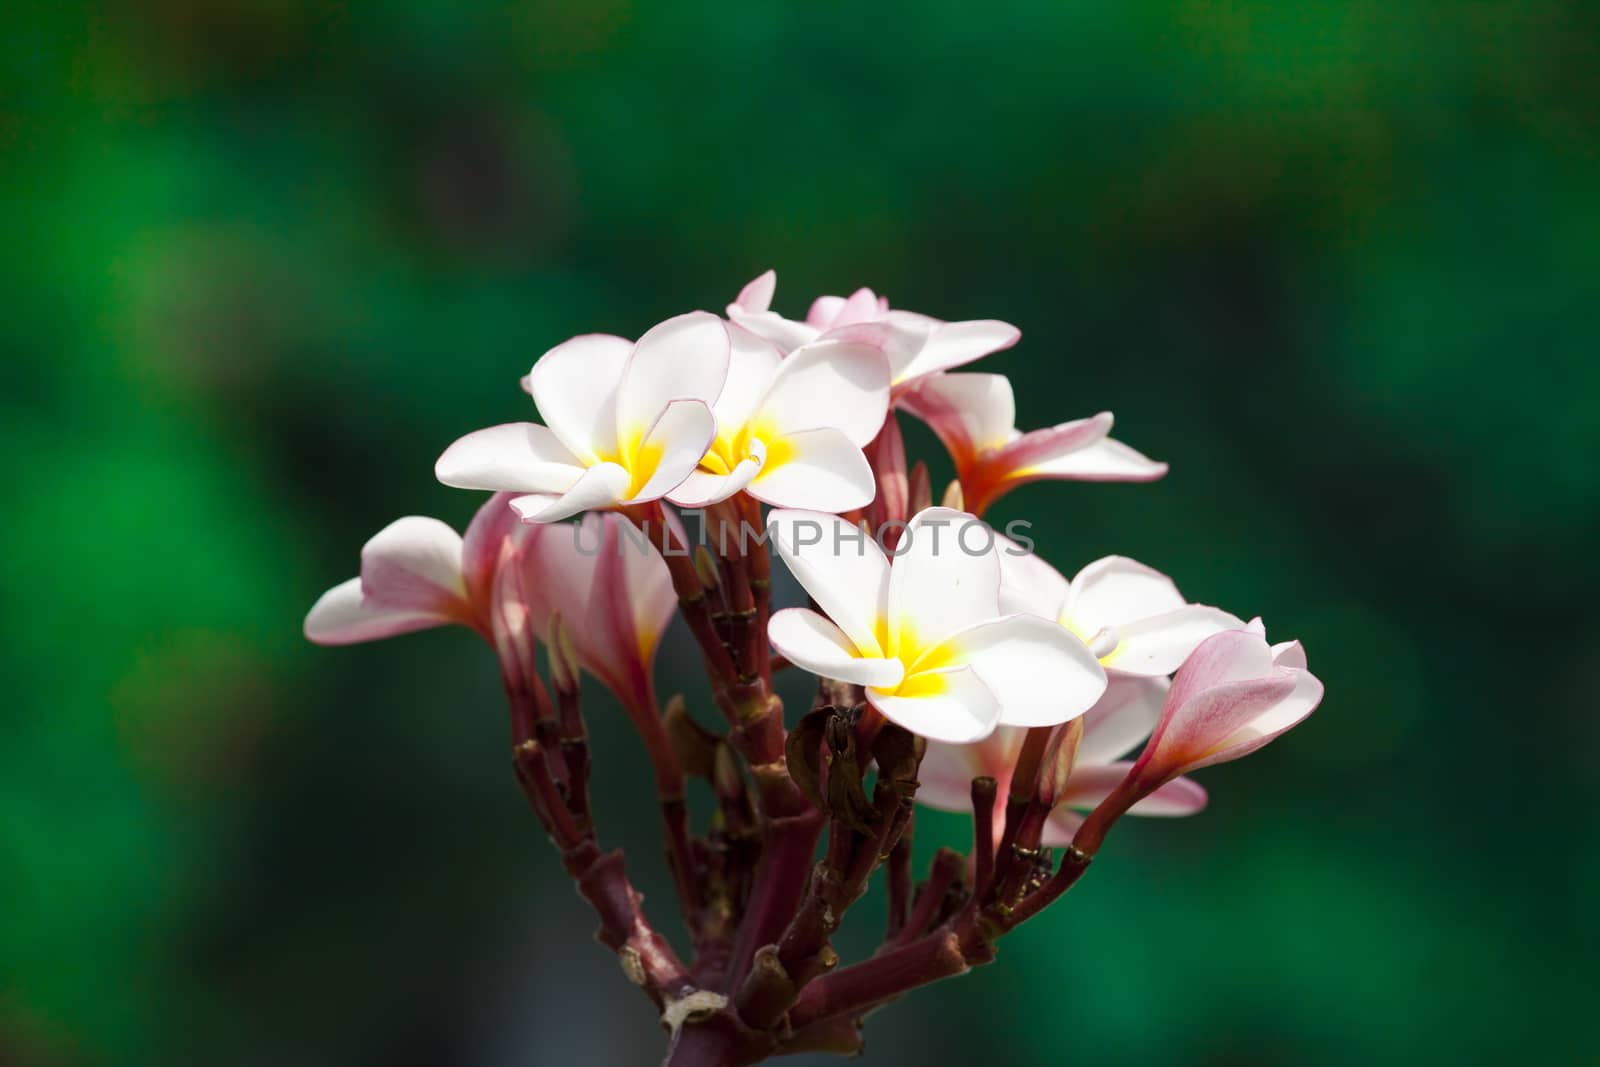 Frangipani Tropical Spa Flower on natural green background